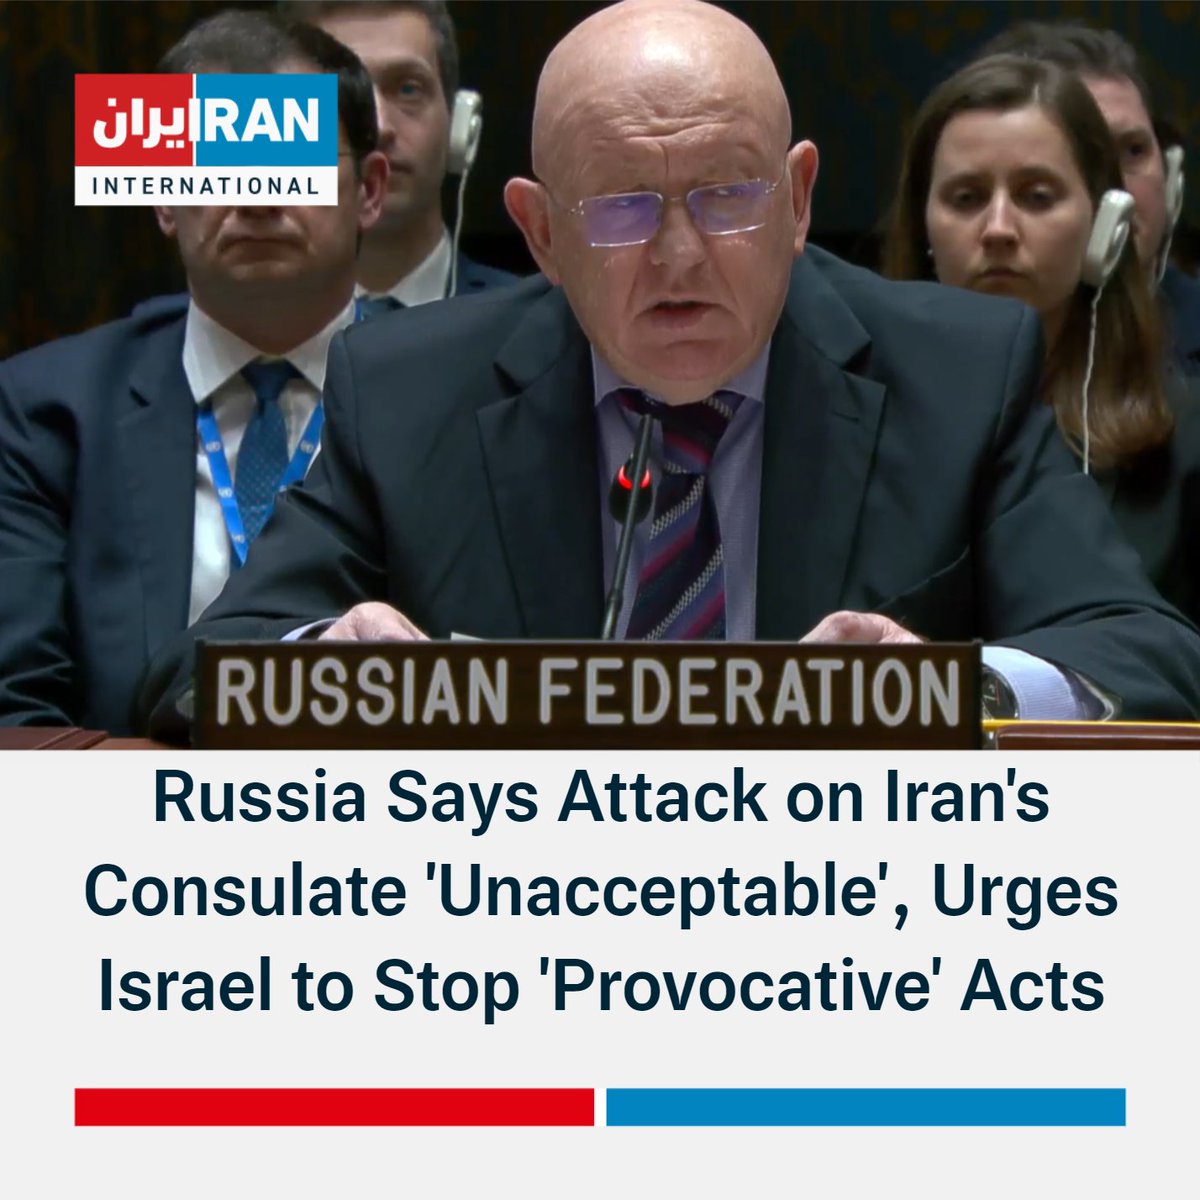 Russia's UN envoy told the Security Council's briefing on the Israeli airstrike on Iran's Damascus consulate, We consider any attacks on diplomatic and consular premises the inviolability of which is guaranteed by the relevant Vienna Conventions of 1961 and 1963 to be categorically unacceptable. This is not the first attack carried out by Israel in densely populated areas of Damascus, which generated high risks of mass casualties of civilians. Such aggressive actions by Israel are designed to further fuel the conflict. They're absolutely unacceptable and must stop. We urge West Jerusalem to abandon the practice of provocative acts against Syria and other areas.